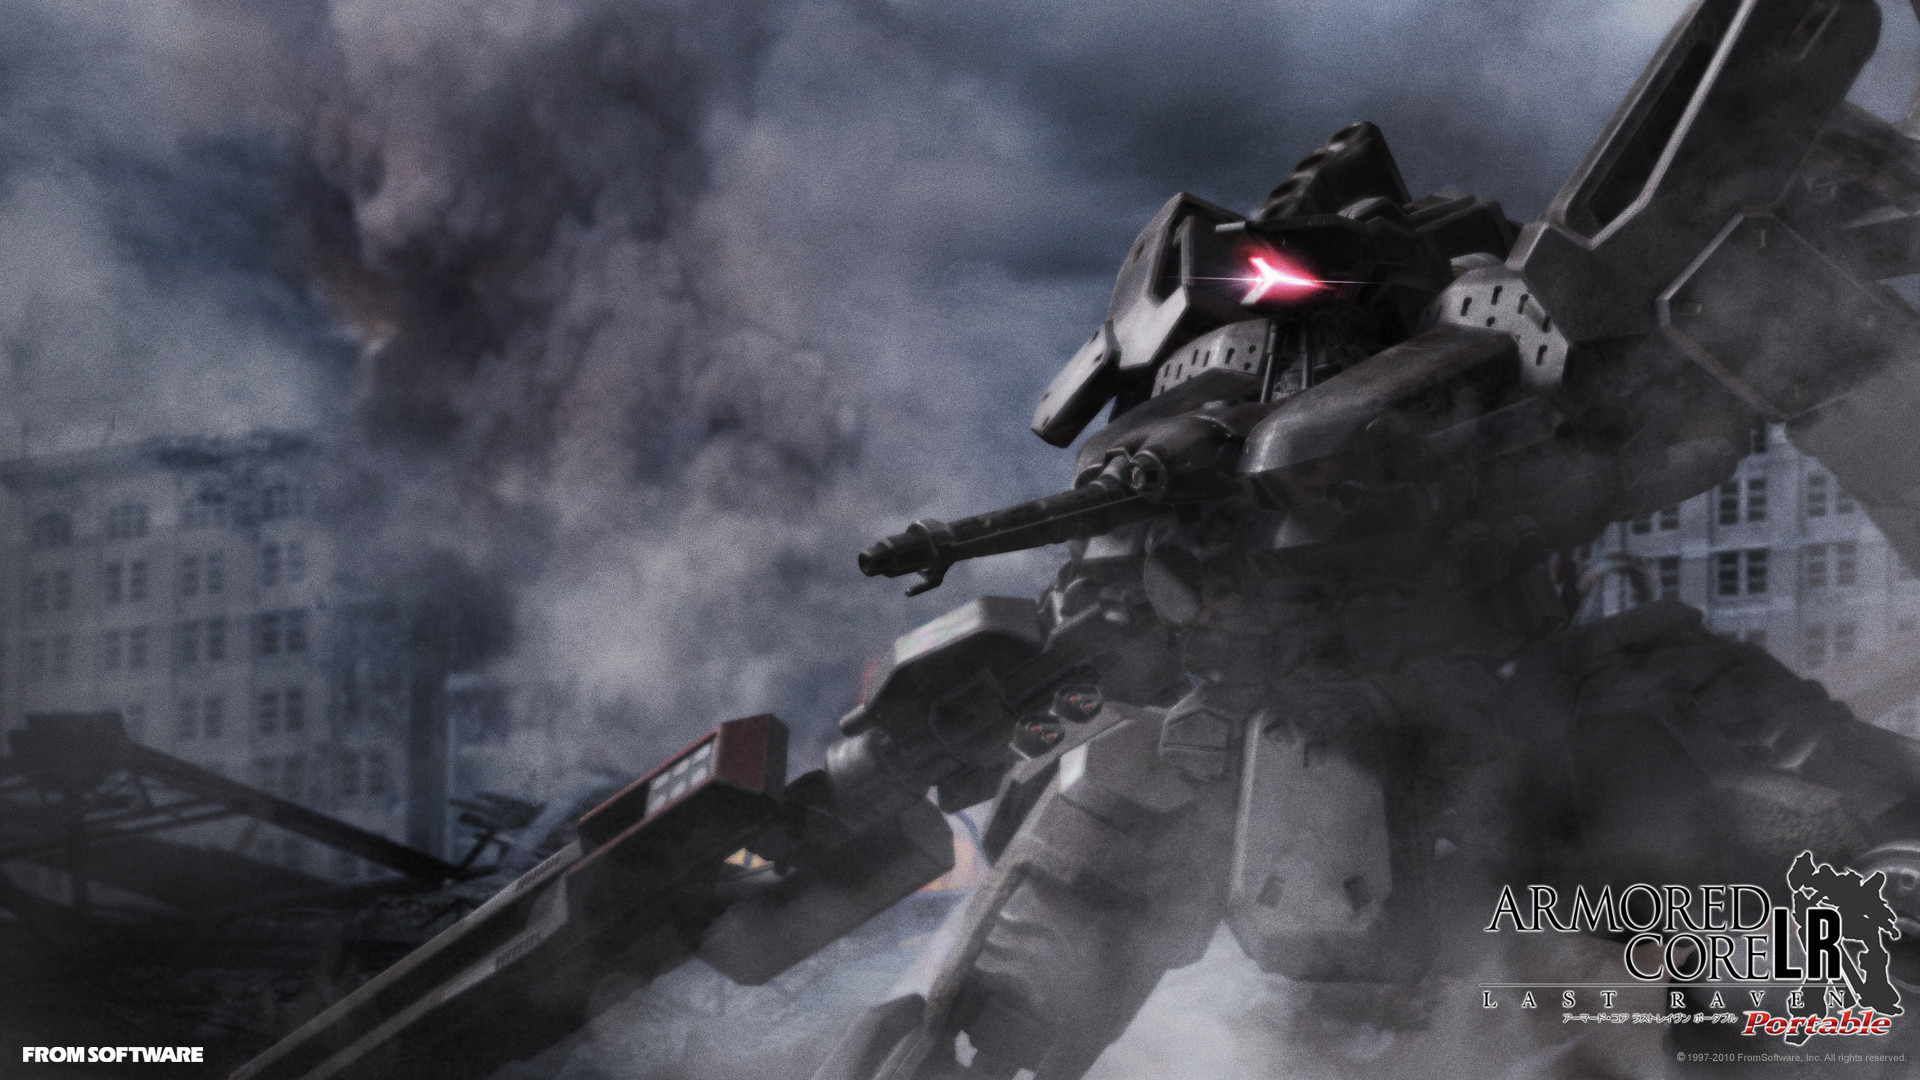 I made Armored Core wallpapers for my iPhone using images I found around  and adapted them  rarmoredcore